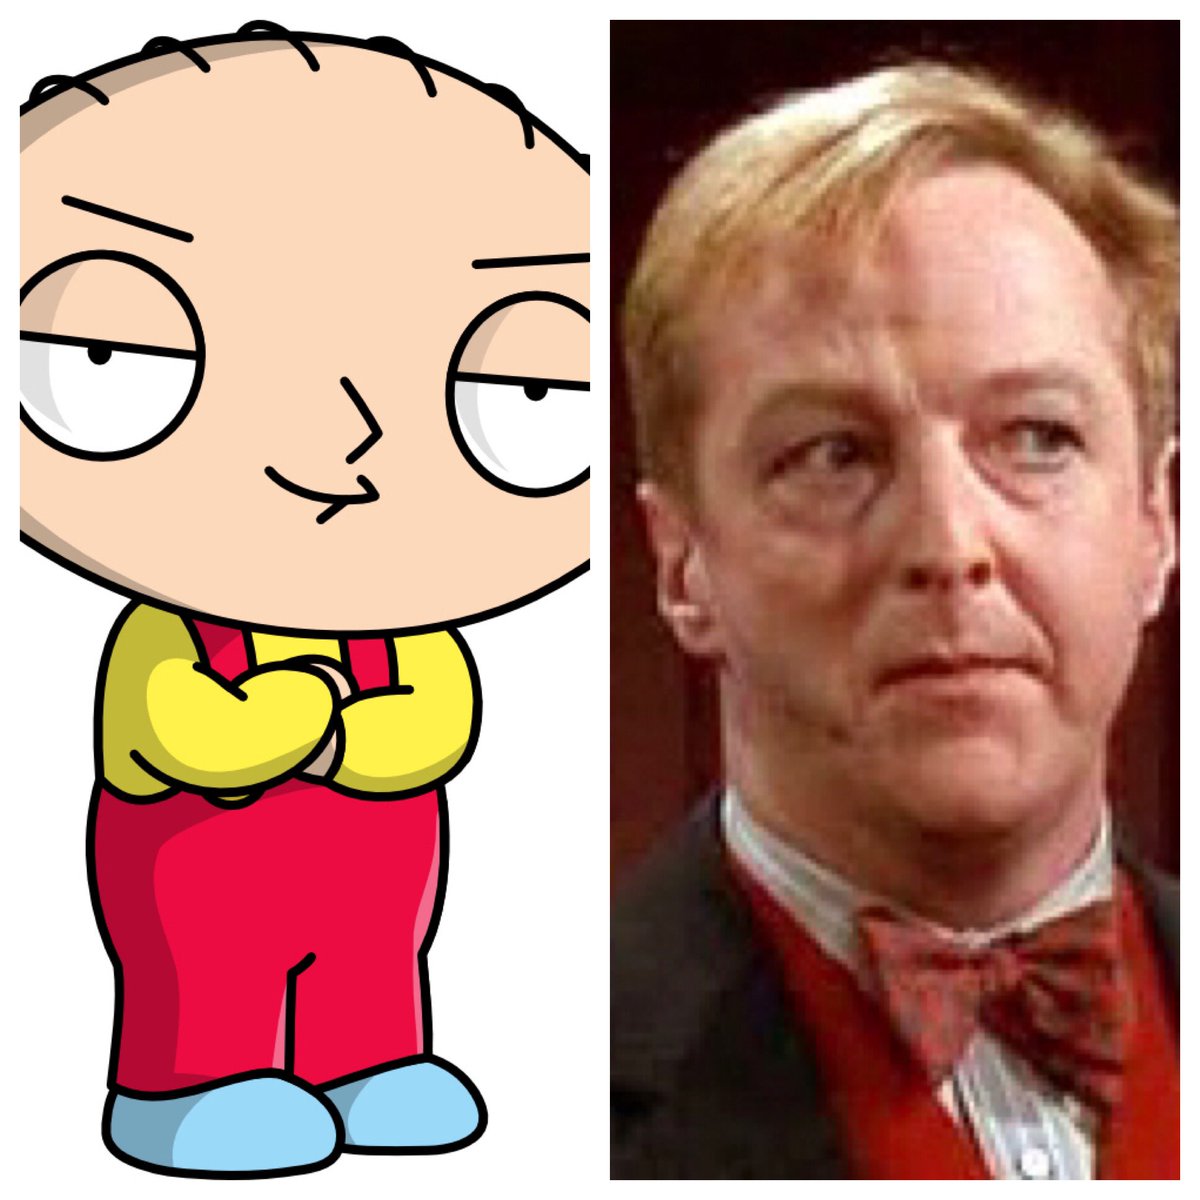 If @FamilyGuyonFOX ever did a live non-animated #familyguy episode, #EdwardHibbert would be (adult or not) #Stewie